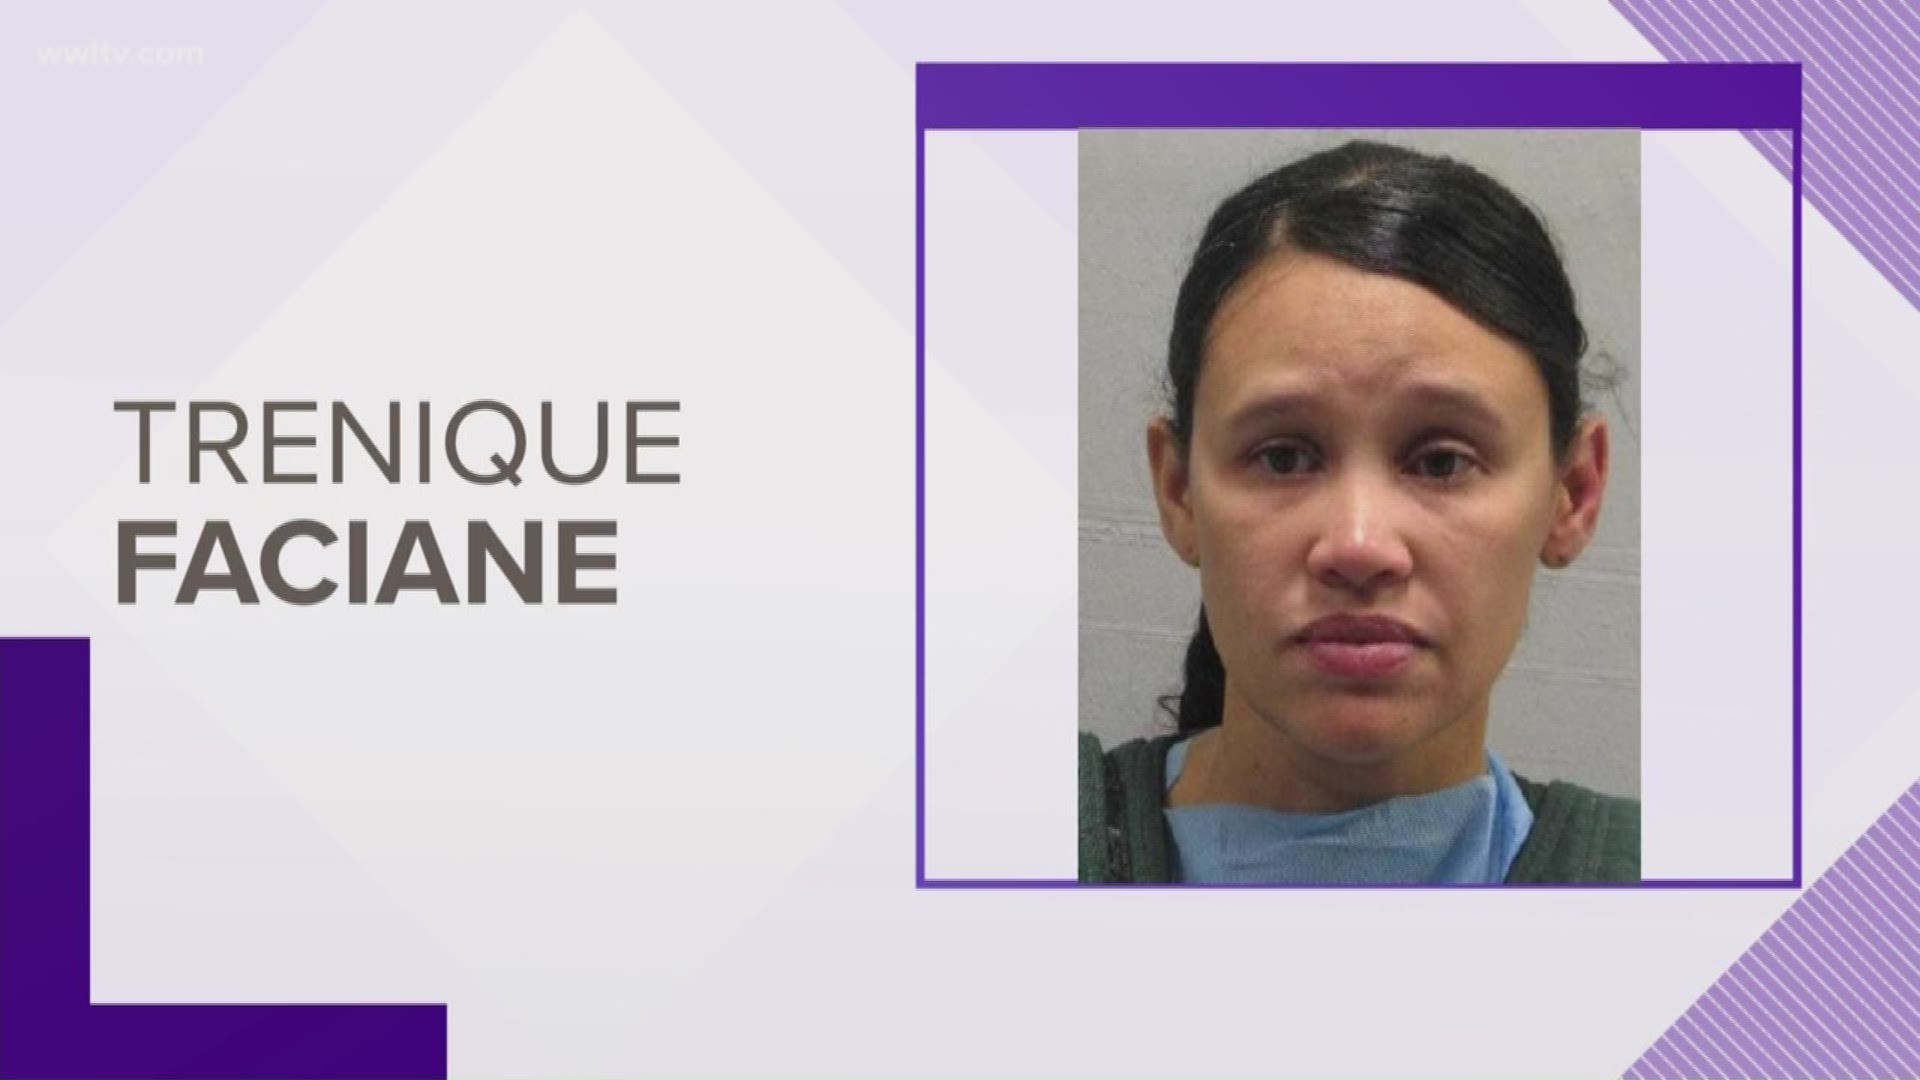 The woman admitted to beating the child with a hairbrush, shaking the child and dropping her in a bathtub. 